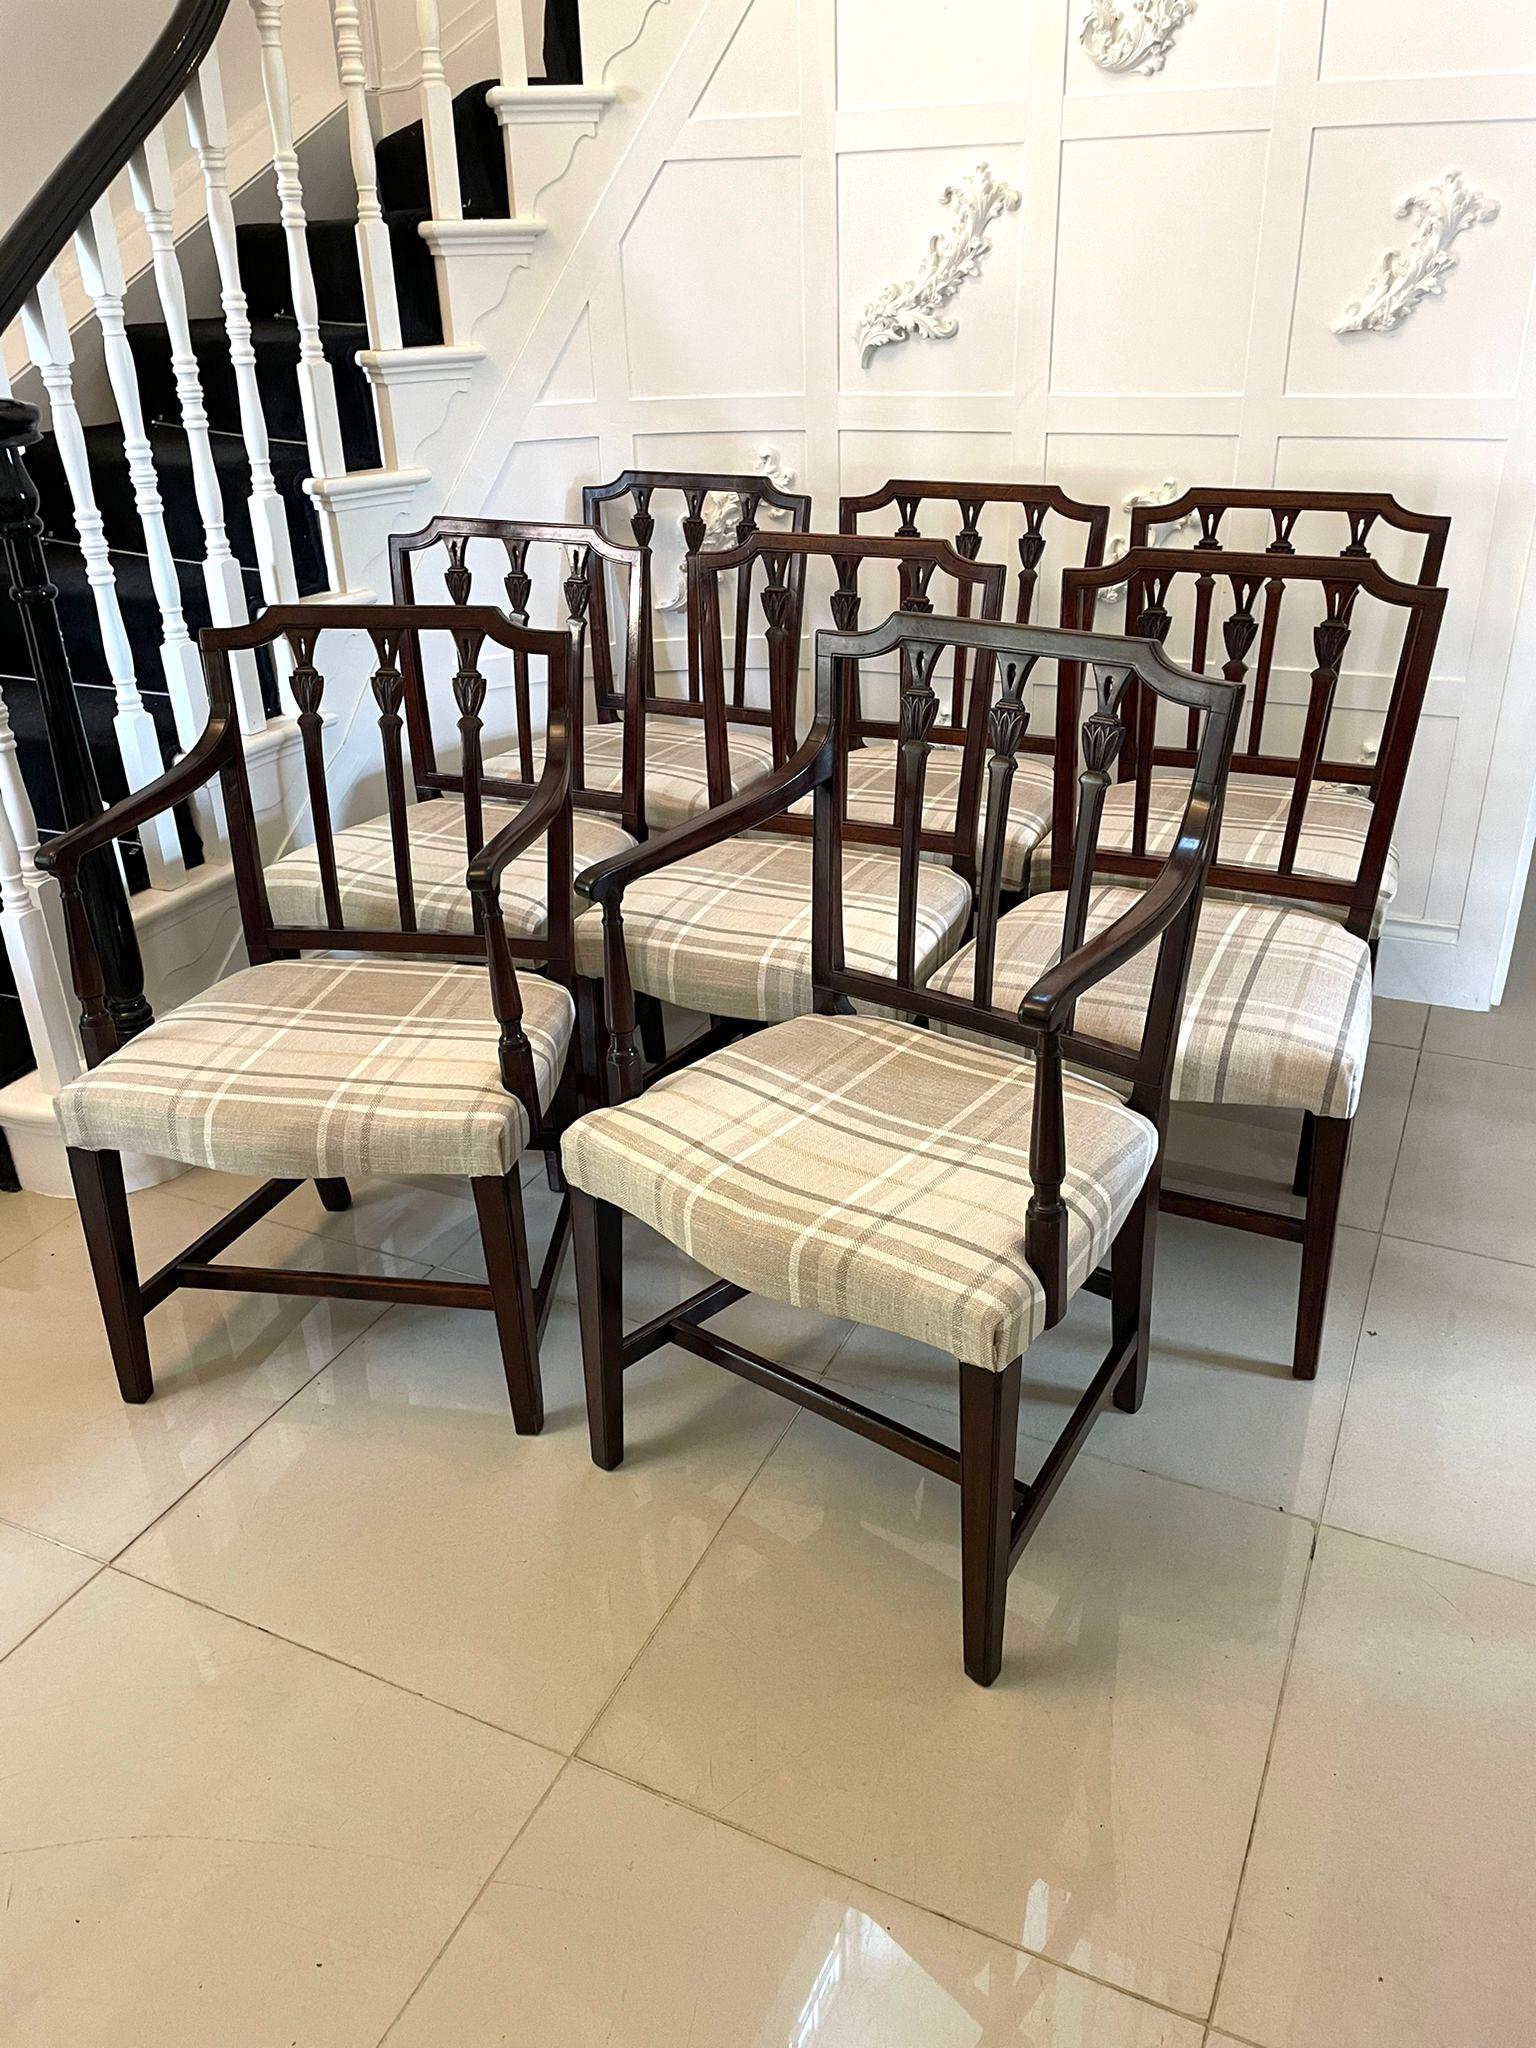 Fine set of 8 antique George III mahogany dining chairs consisting of a pair of elbow chairs and 6 single chairs having superb quality mahogany carved backs with a turned mahogany support, the elbow chairs having shaped open arms, newly